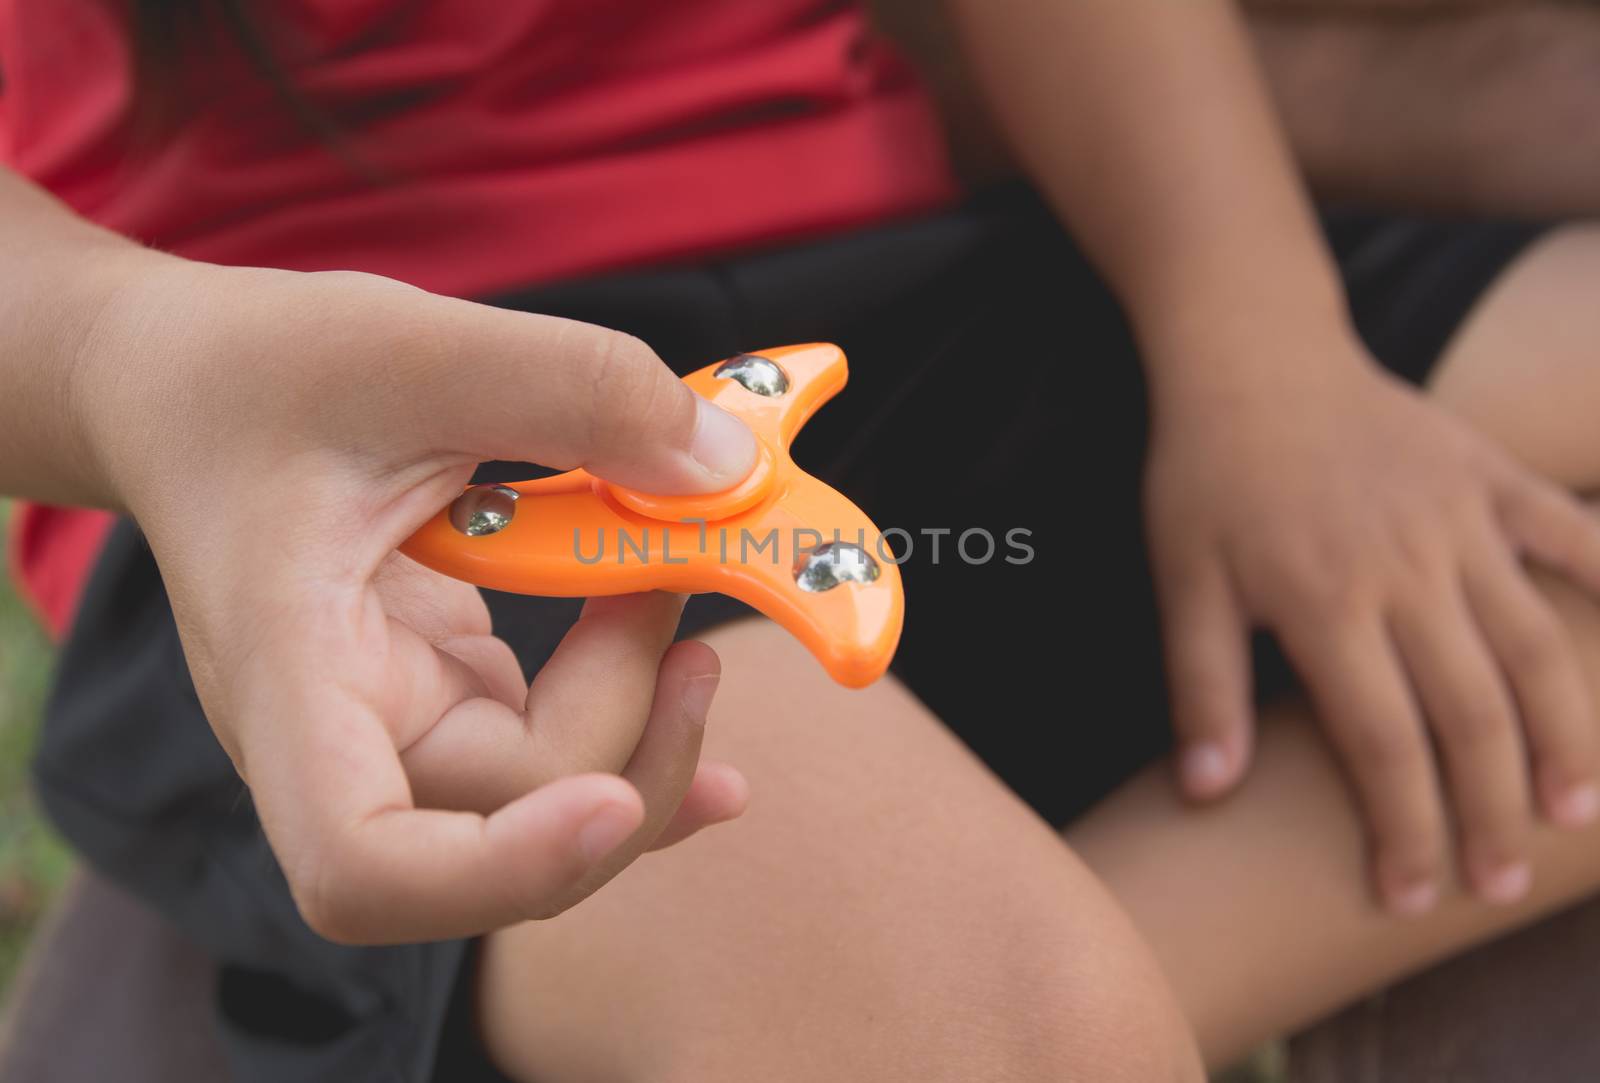 Children play with finger spinner gadget.Popular spinner device to play balance game.